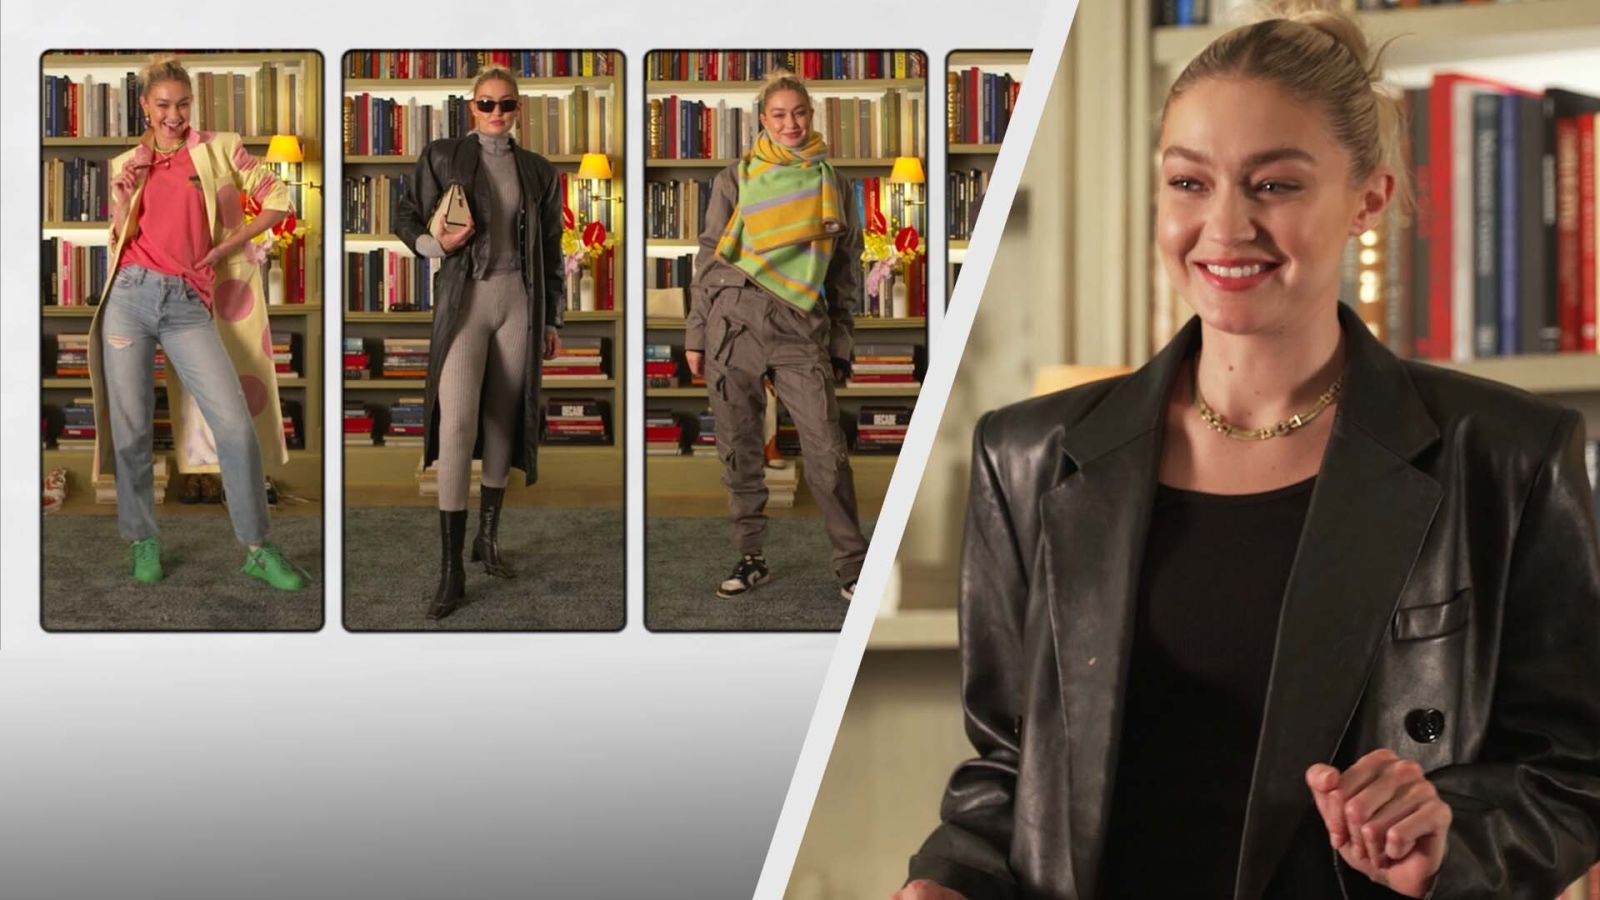 How to Make Your Wardrobe Cozy and Presentable, According to Gigi Hadid